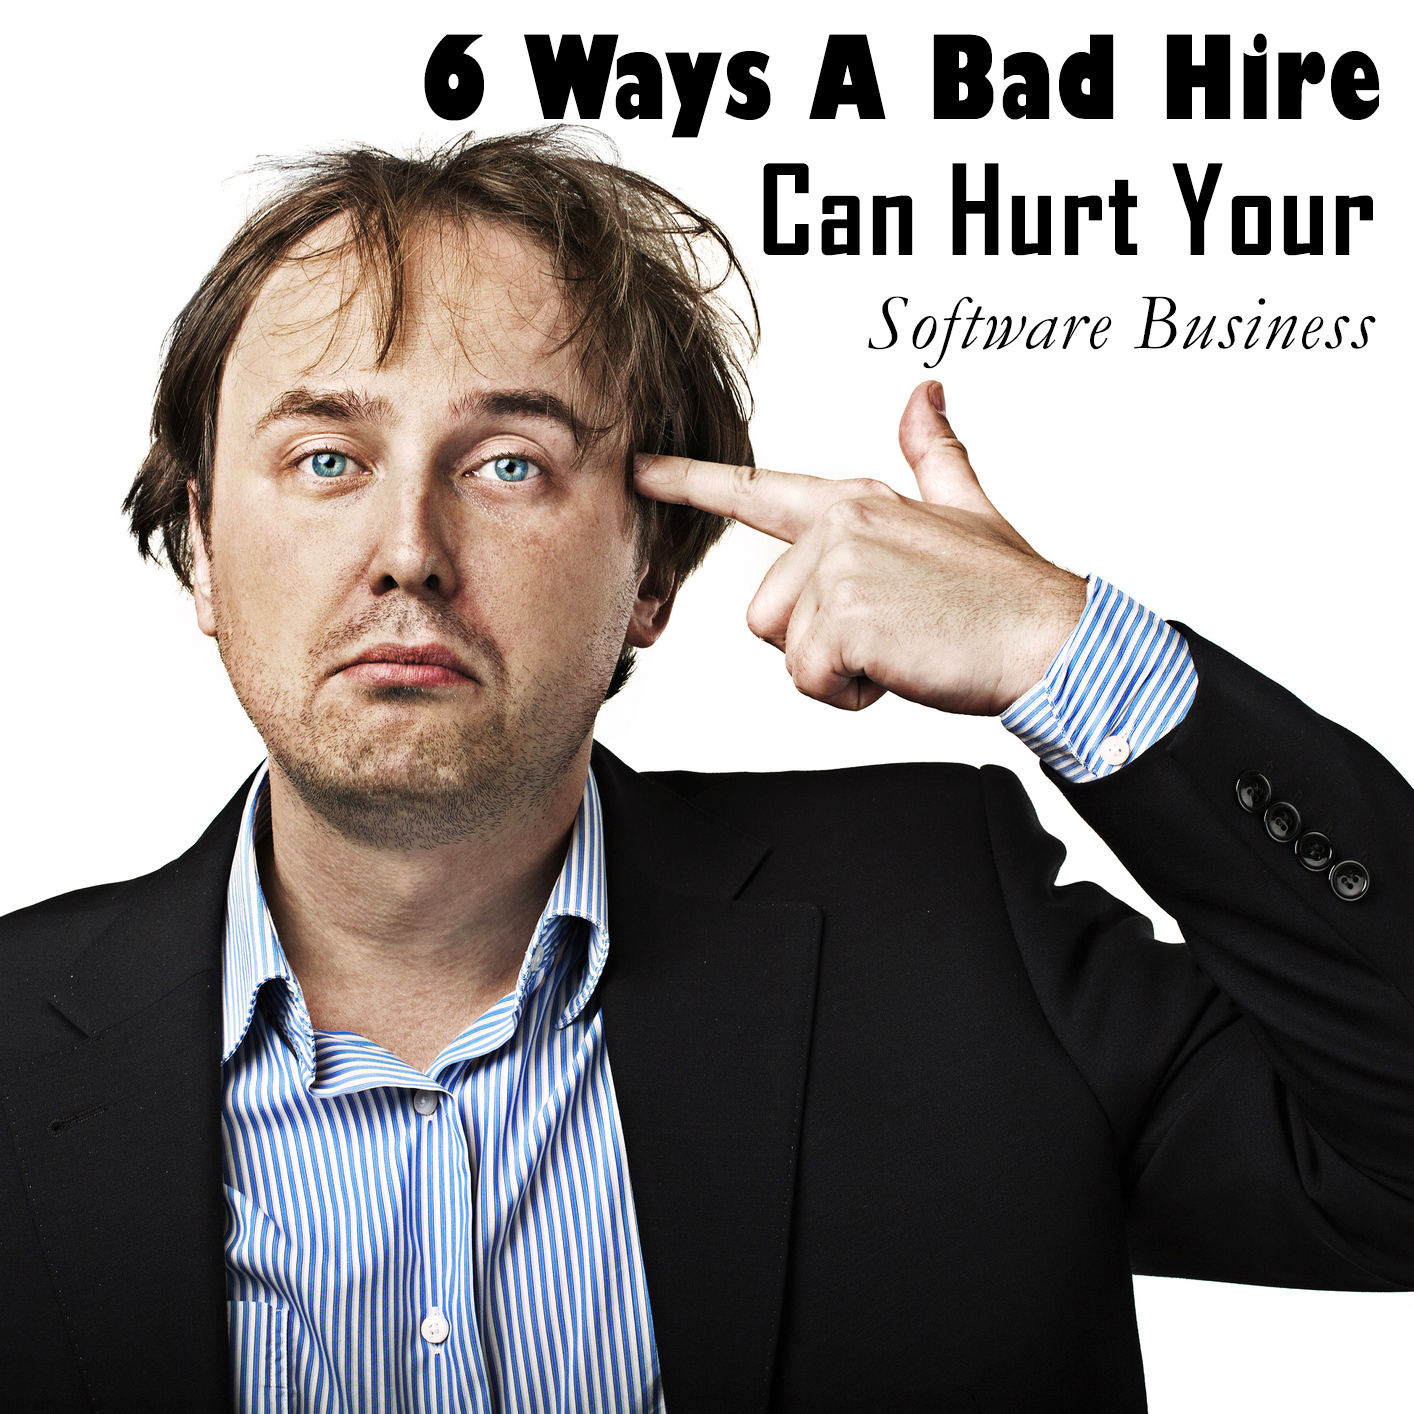 6 ways a bad hire can hurt your software business